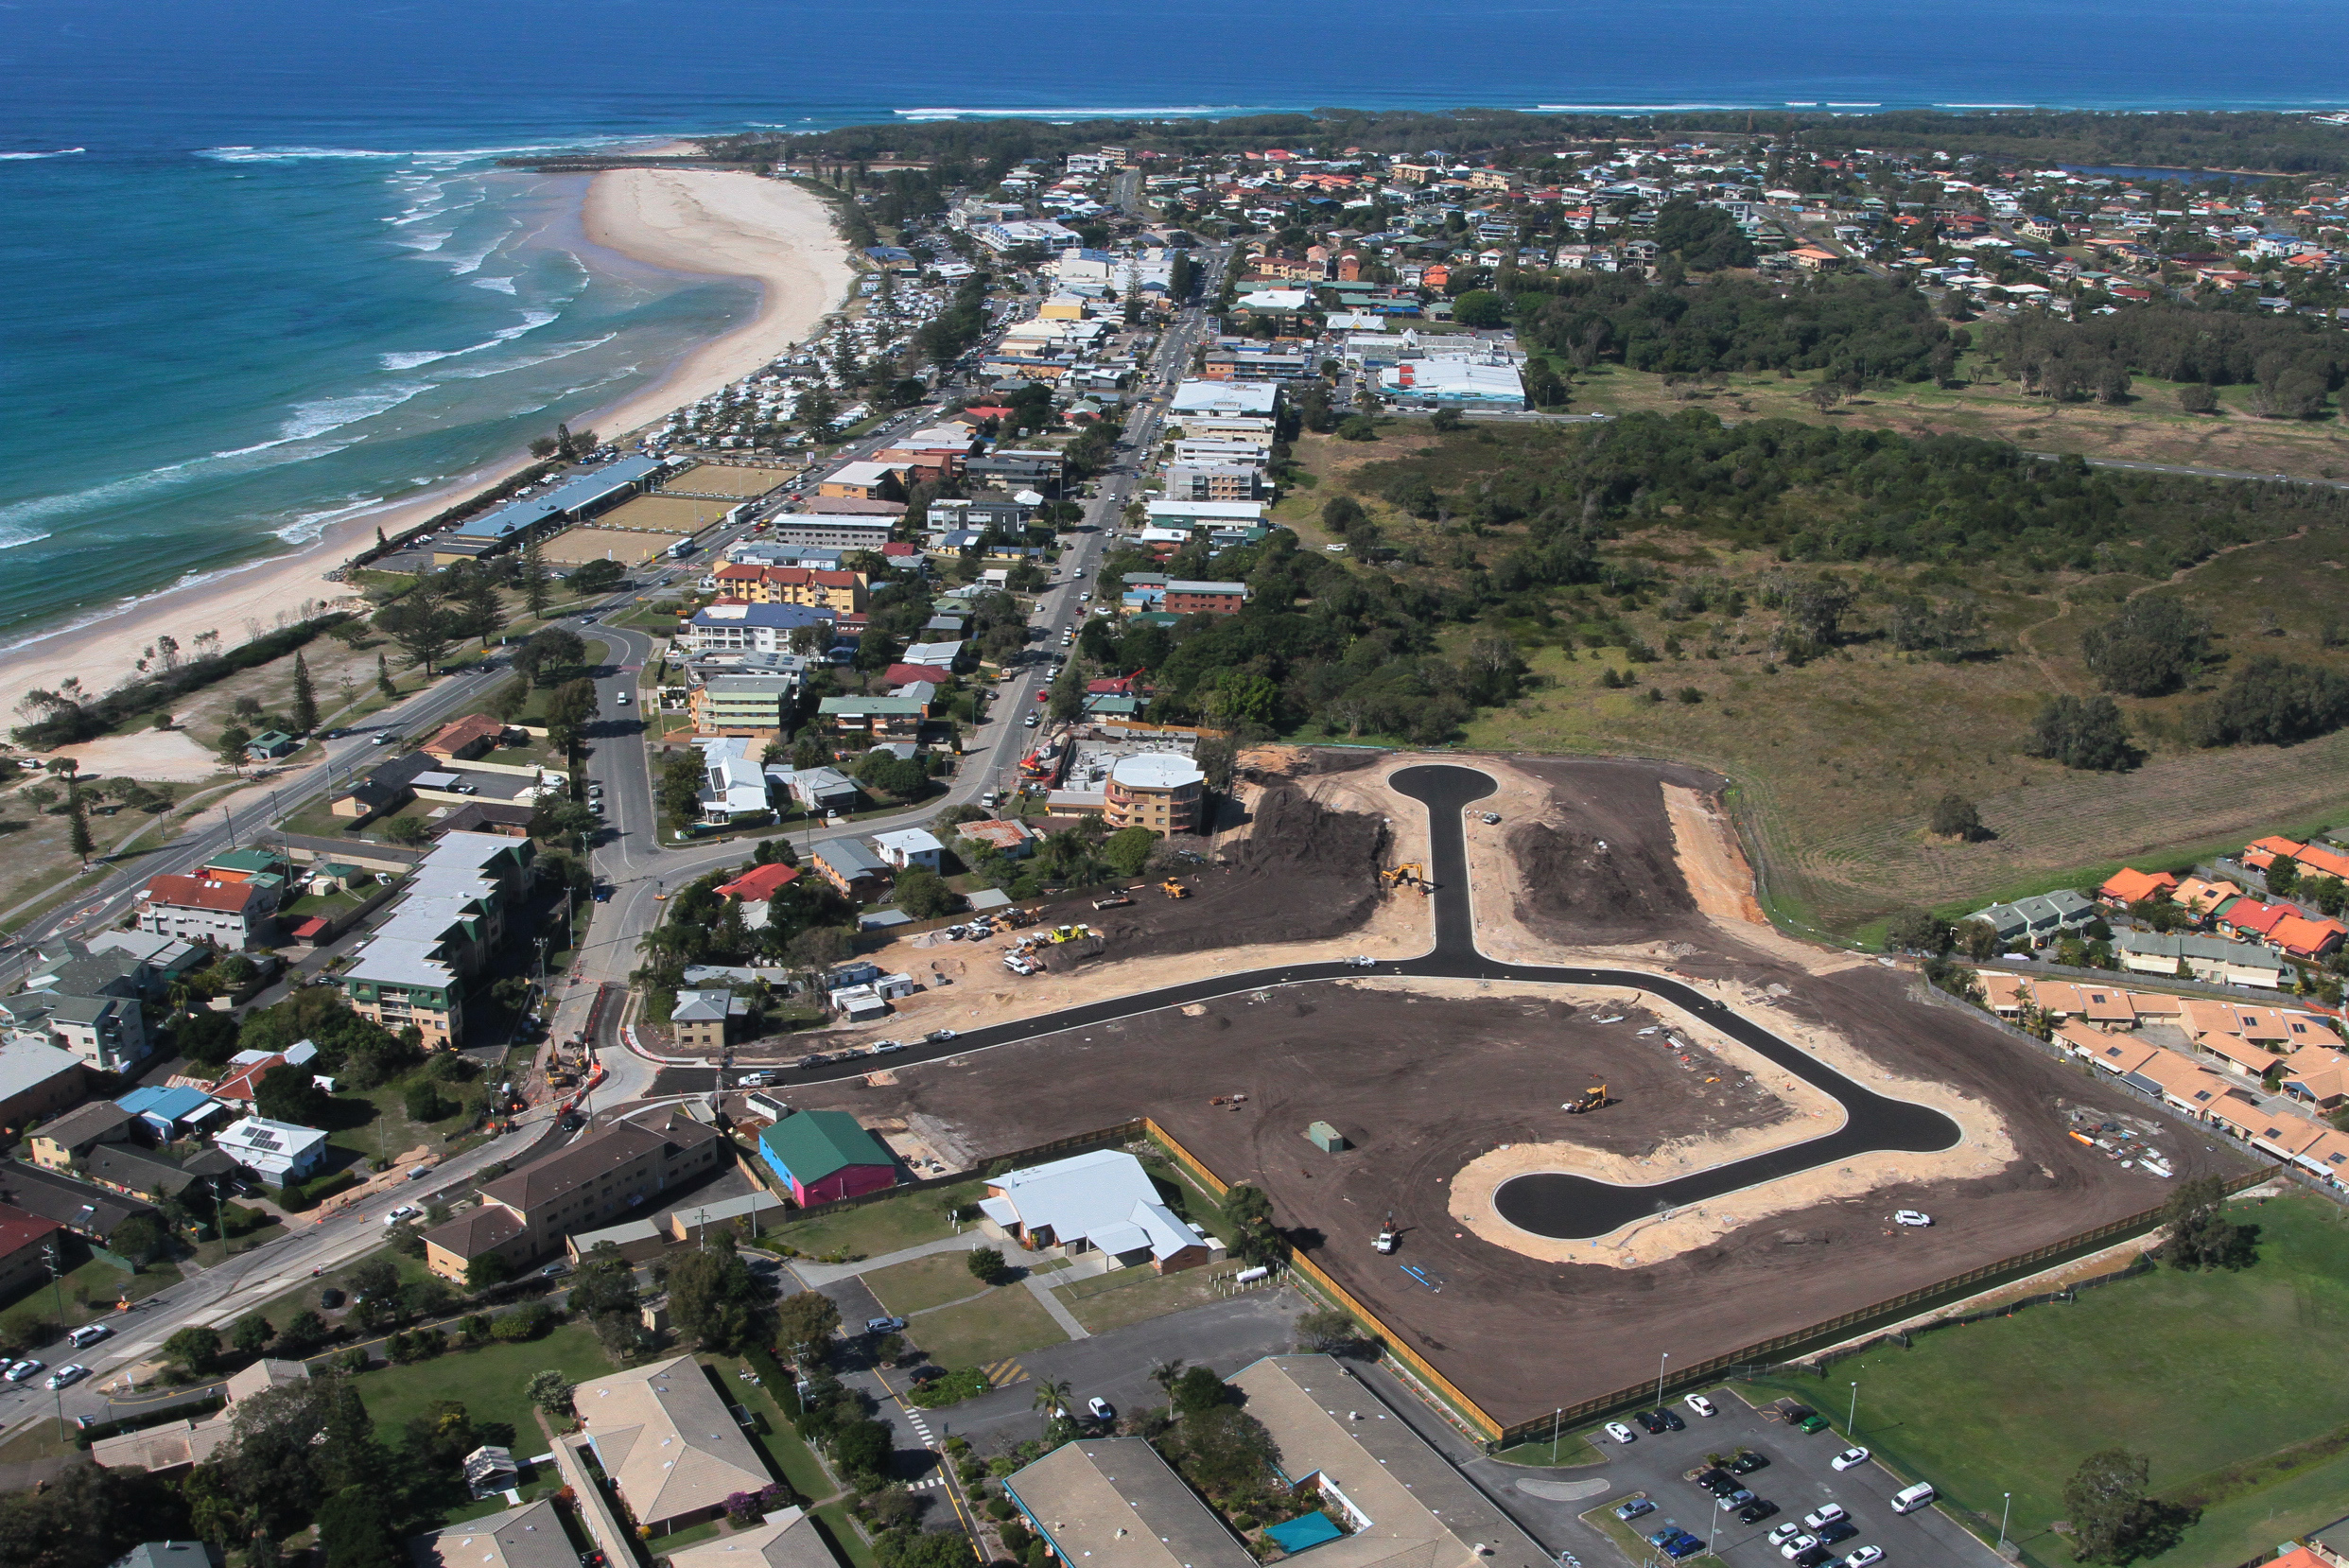 The Dunes Estate was constructed in the heart of Kingscliff